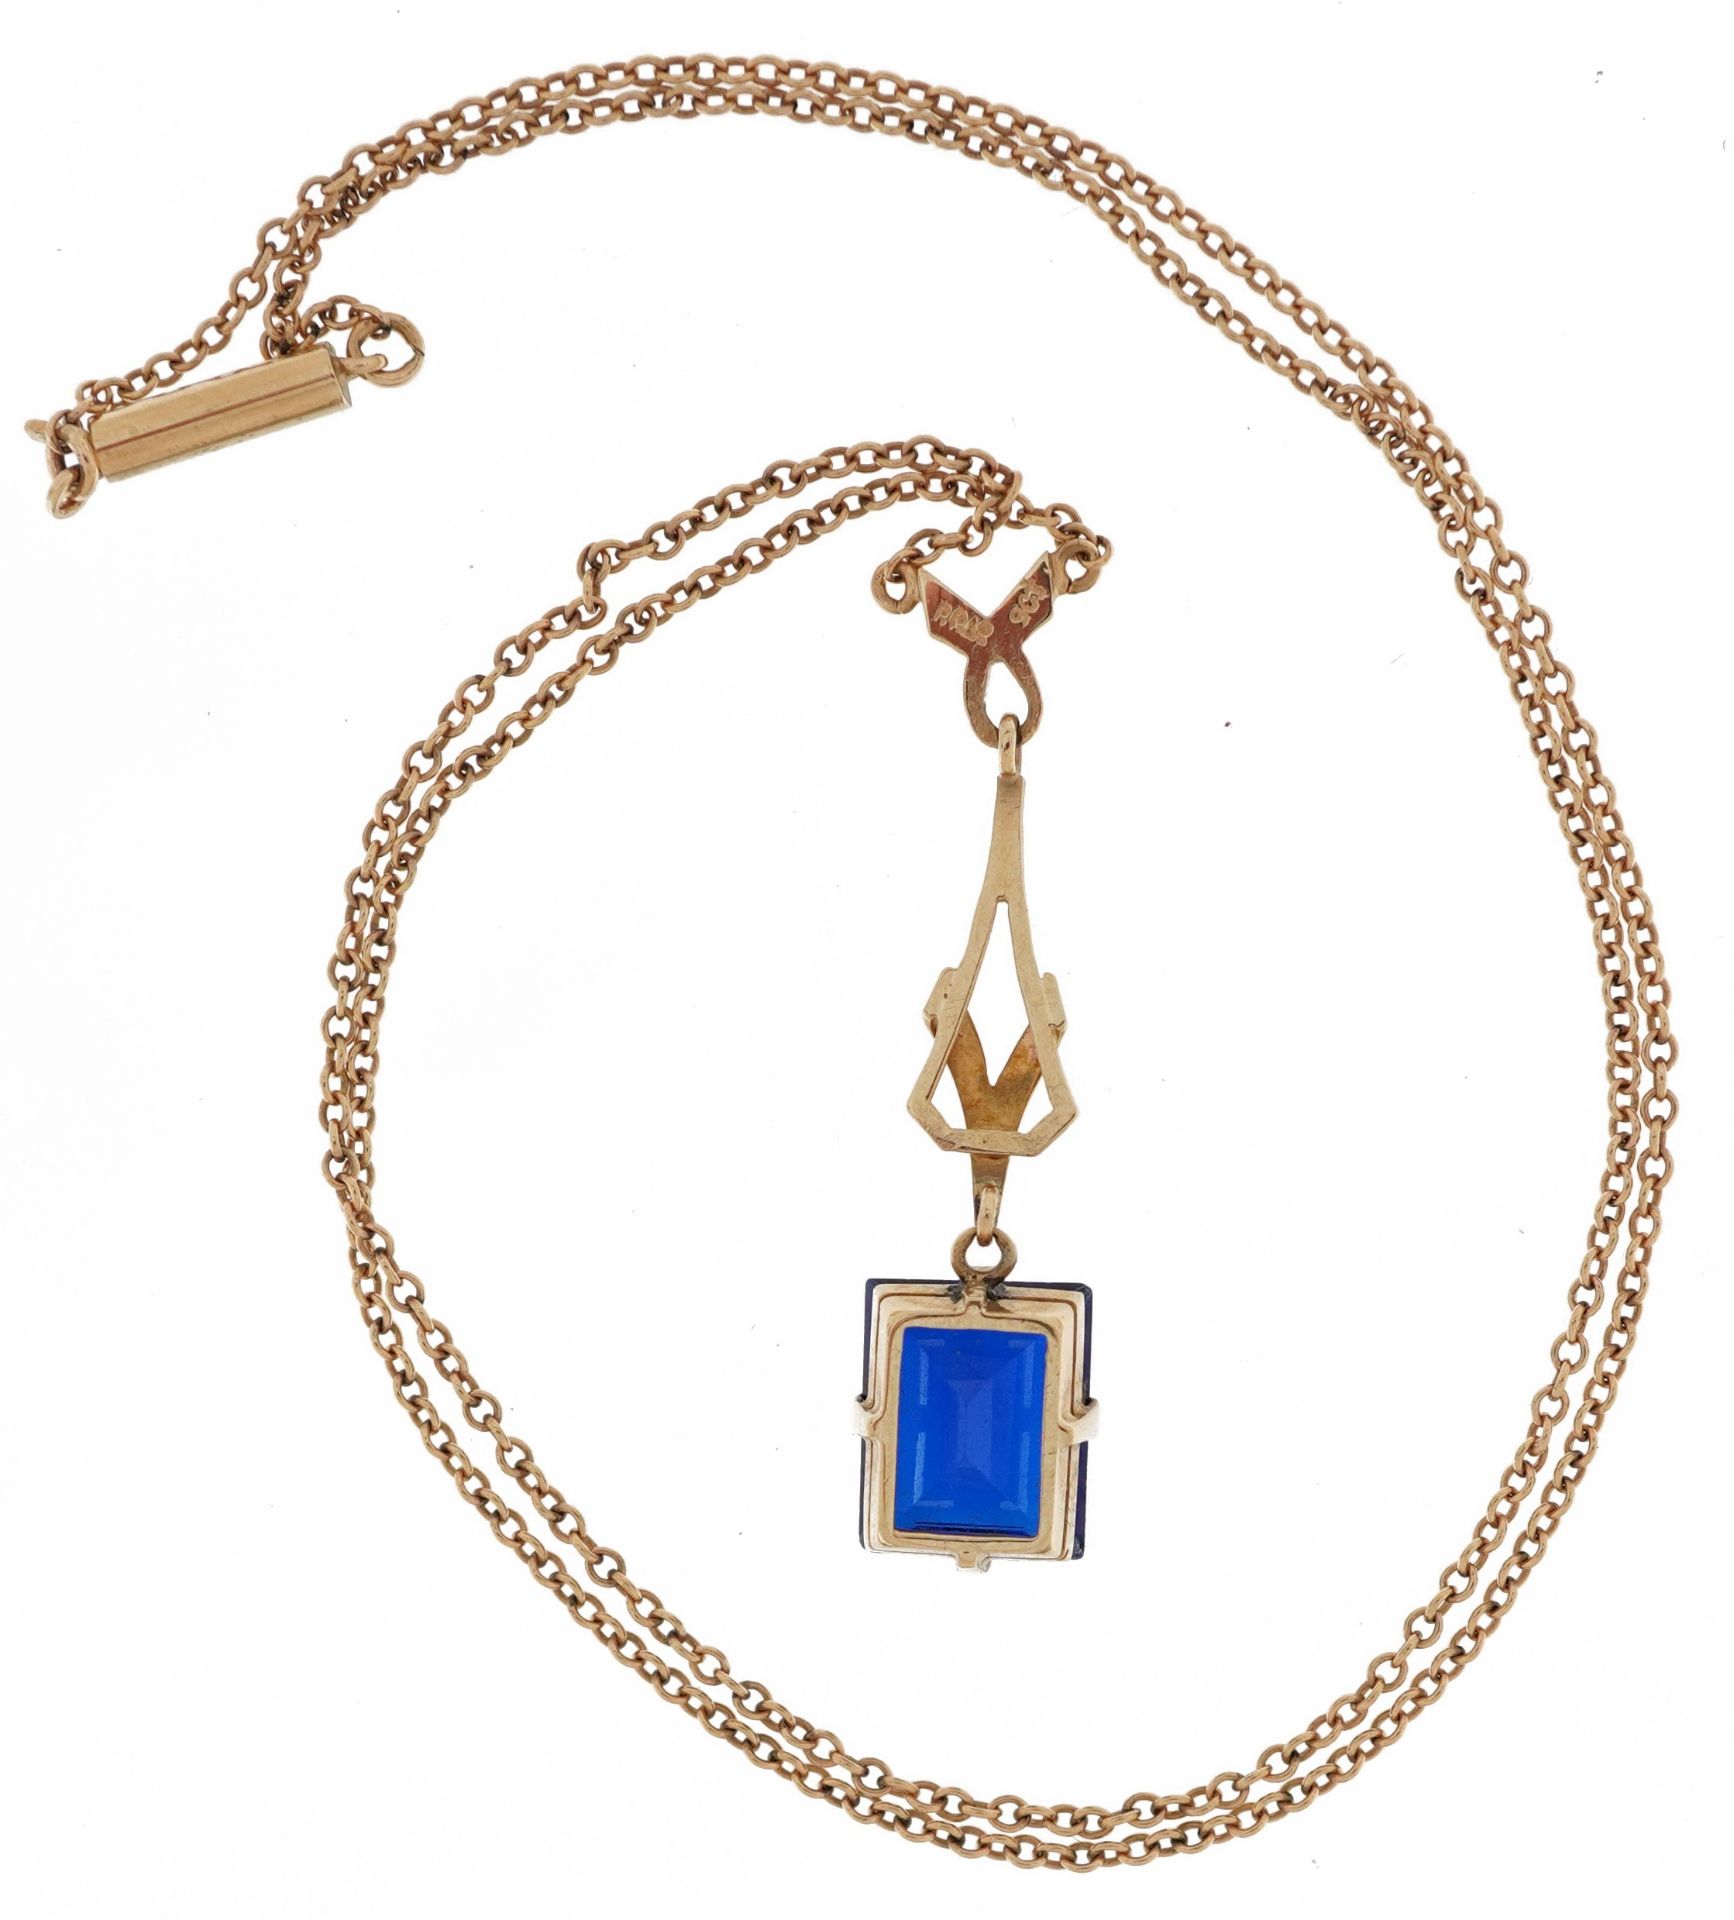 9ct gold blue spinel pendant on a 9ct gold necklace, 42cm in length, total 3.8g - Image 3 of 4